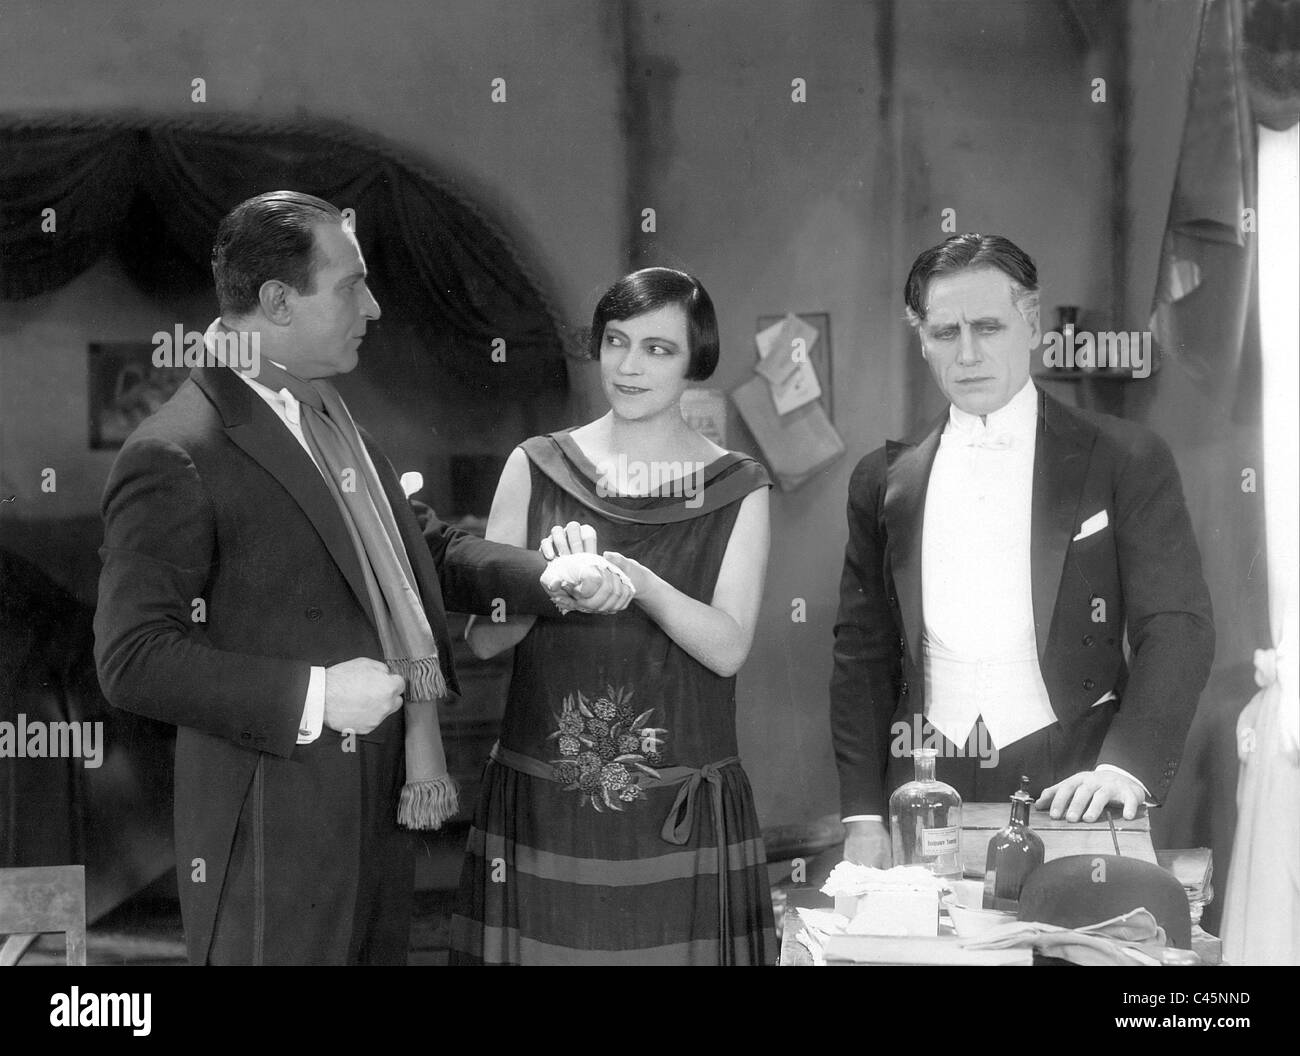 Theodore Becker, Asta Nielsen and Gregory Chmara in 'Athletes', 1925 Stock Photo